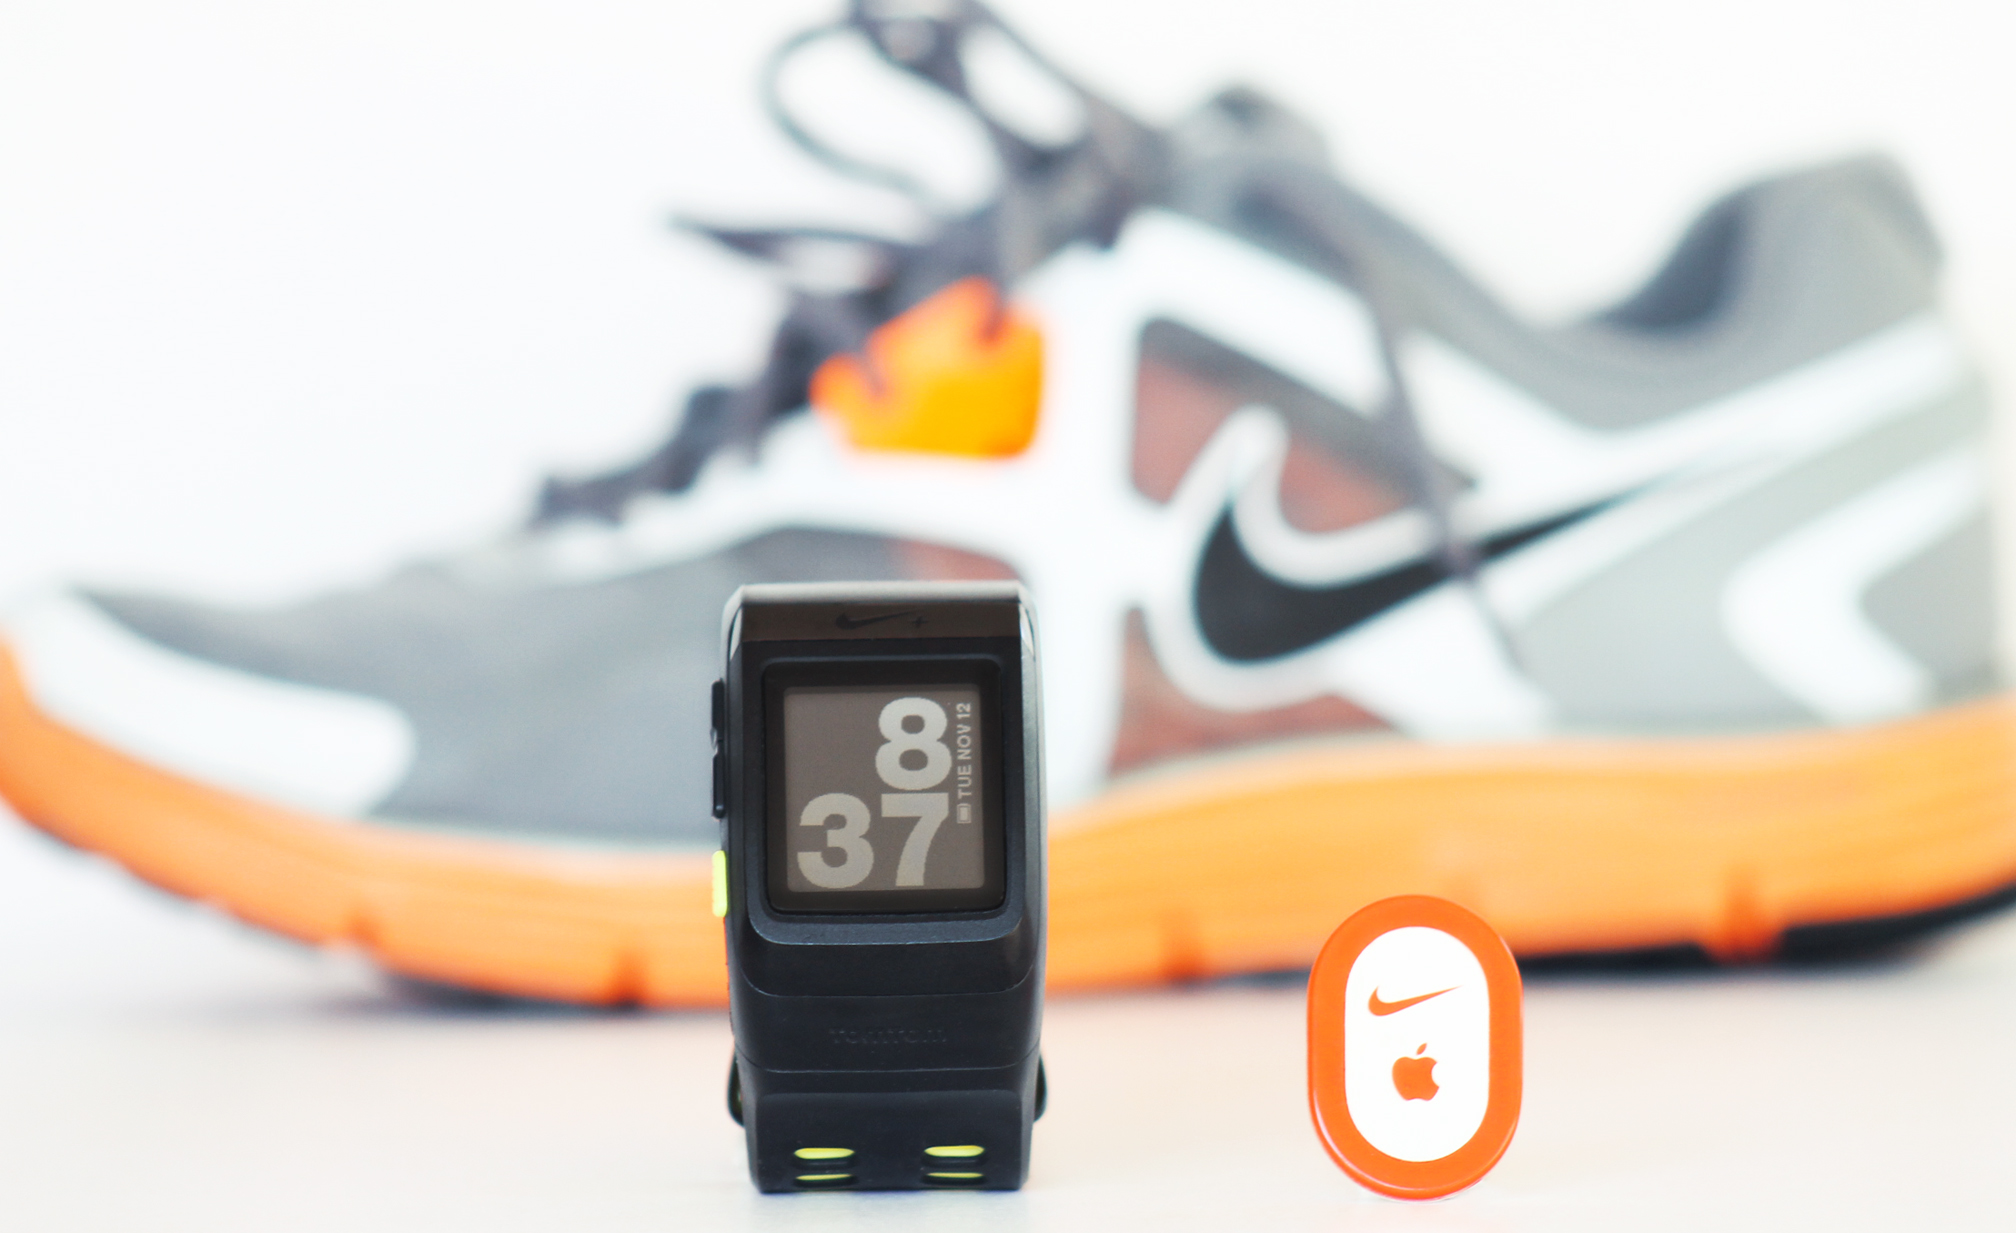 Nylon India kralen The Nike+ SportWatch and the Nike+ Sensor: Motivating You To Run Your Best